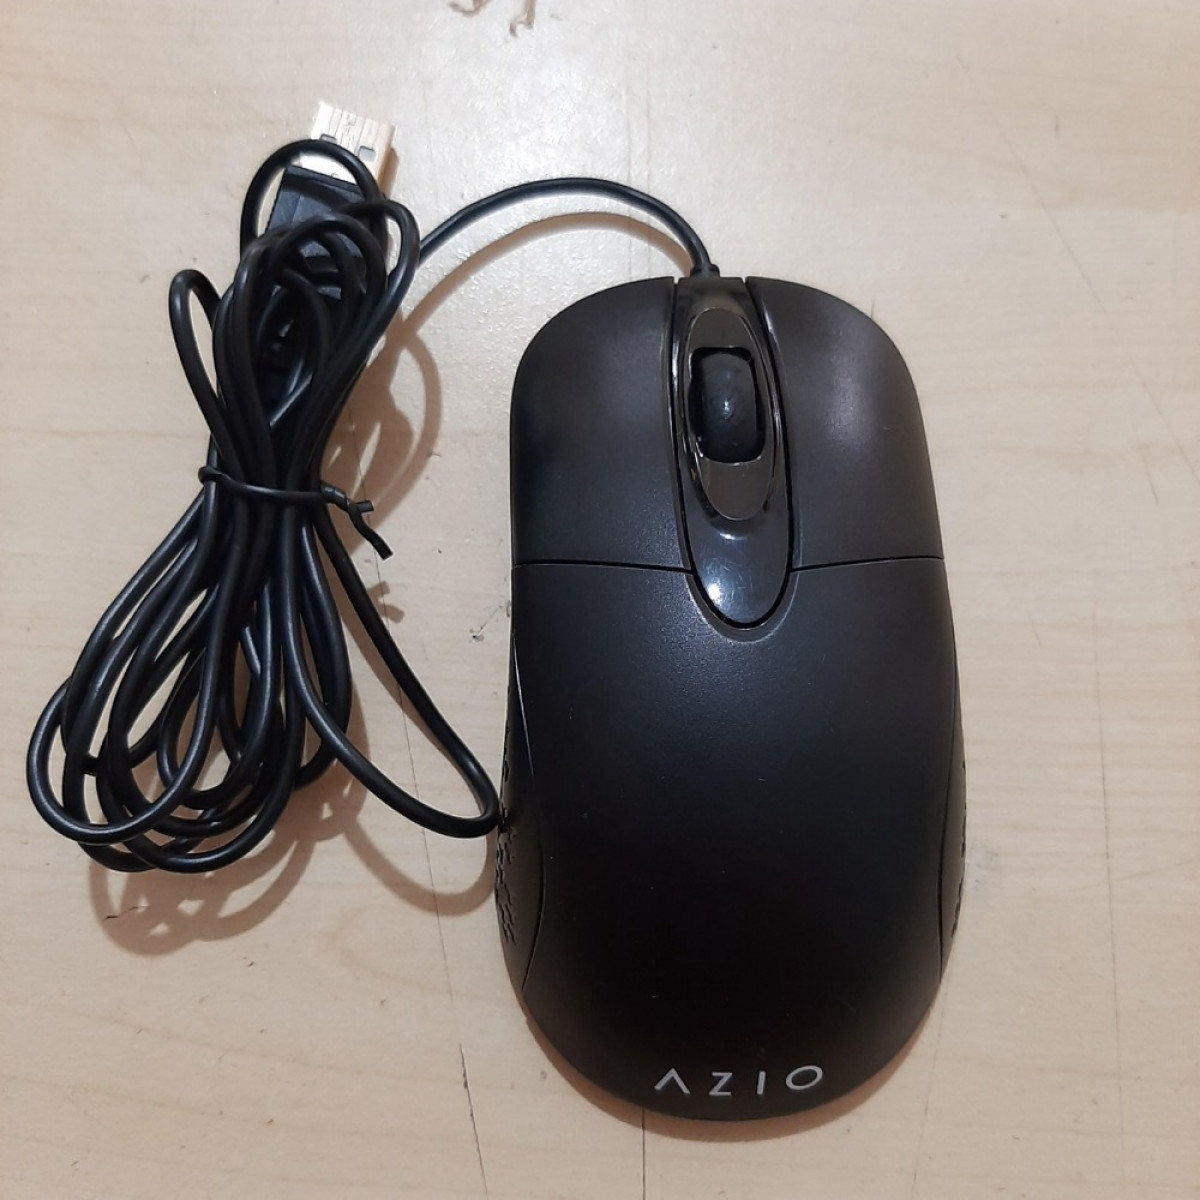 AZIO MS530 Antimicrobial Wired Optical Standard Ambidextrous Mouse